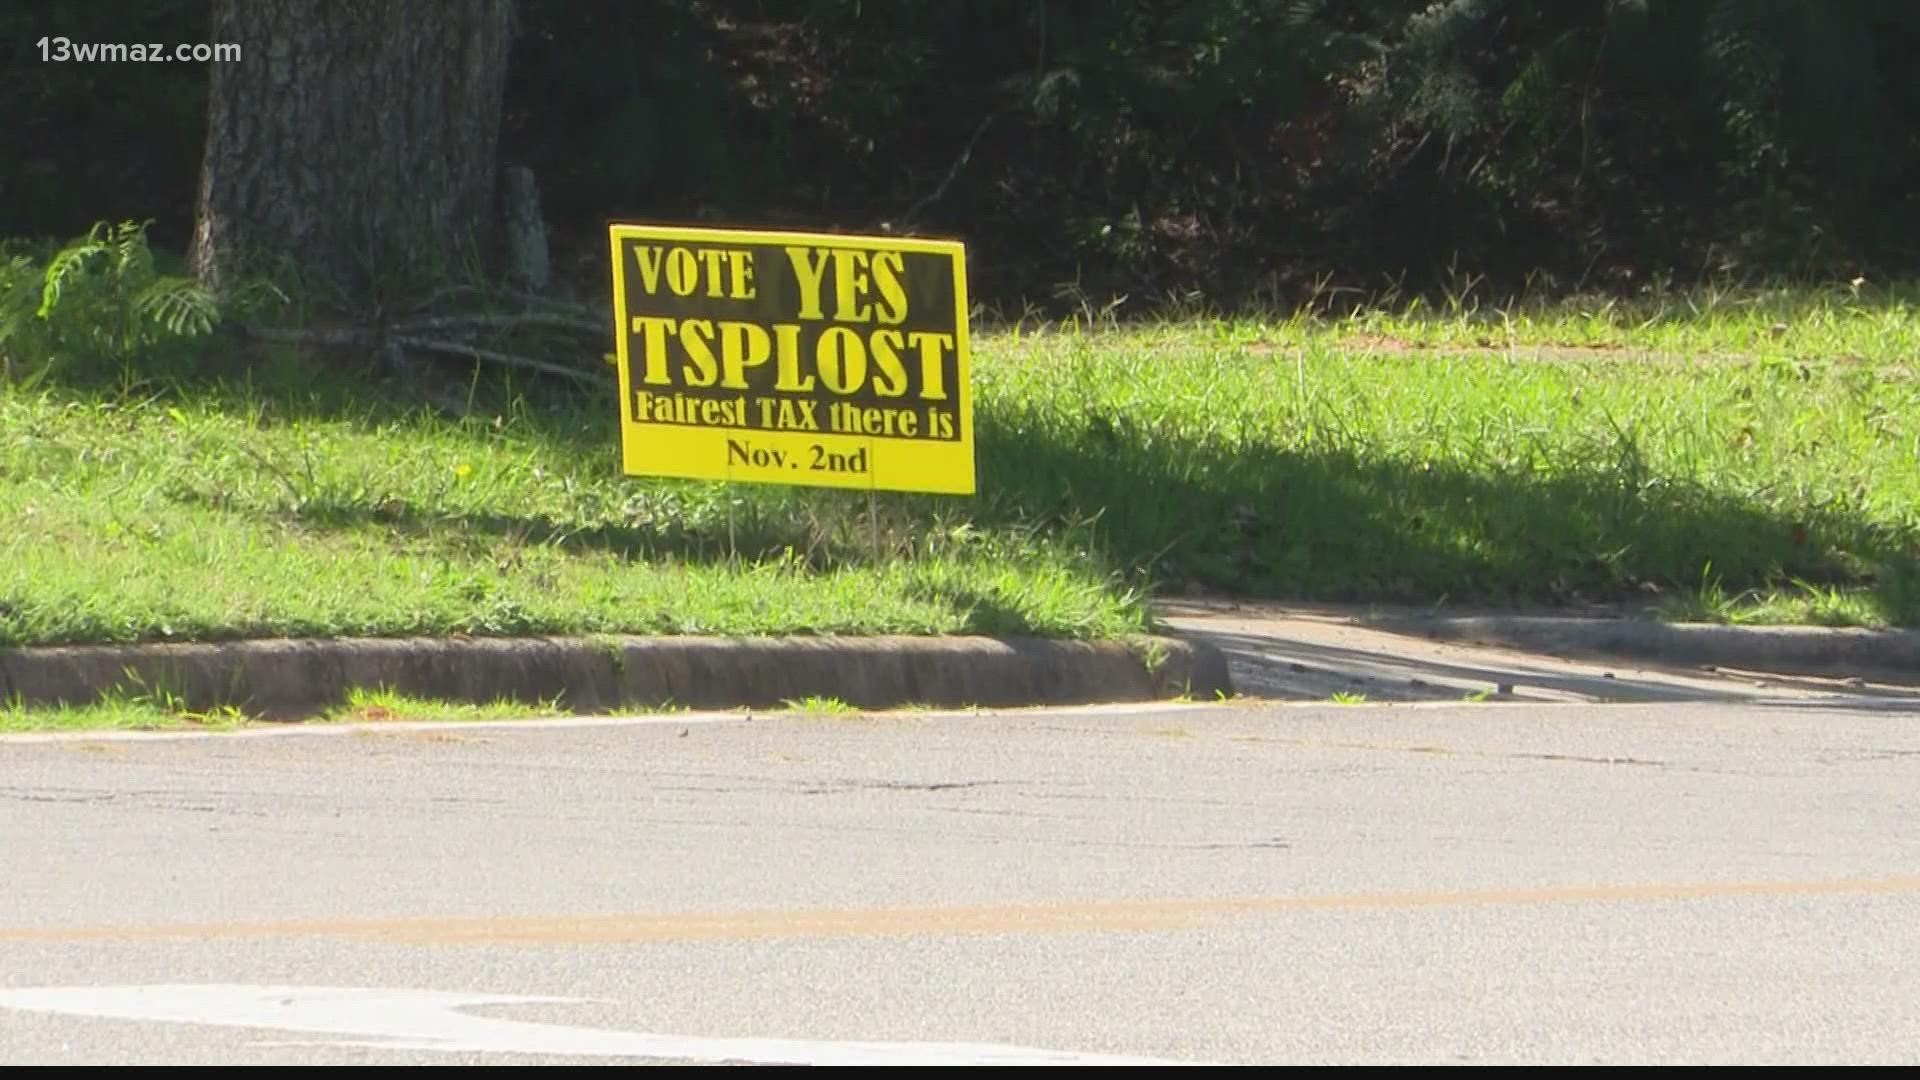 If the T-SPLOST passes, the county says it should raise about $17 million in revenue, and $14.1 million of these will go to Monroe County.